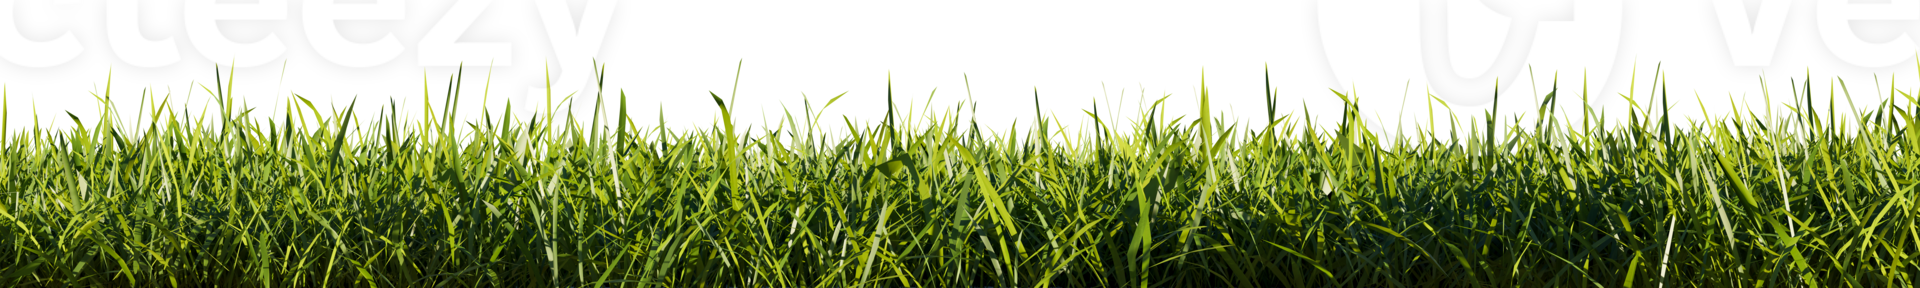 Bright green grass border isolated on transparent background. 3d rendering illustration. png